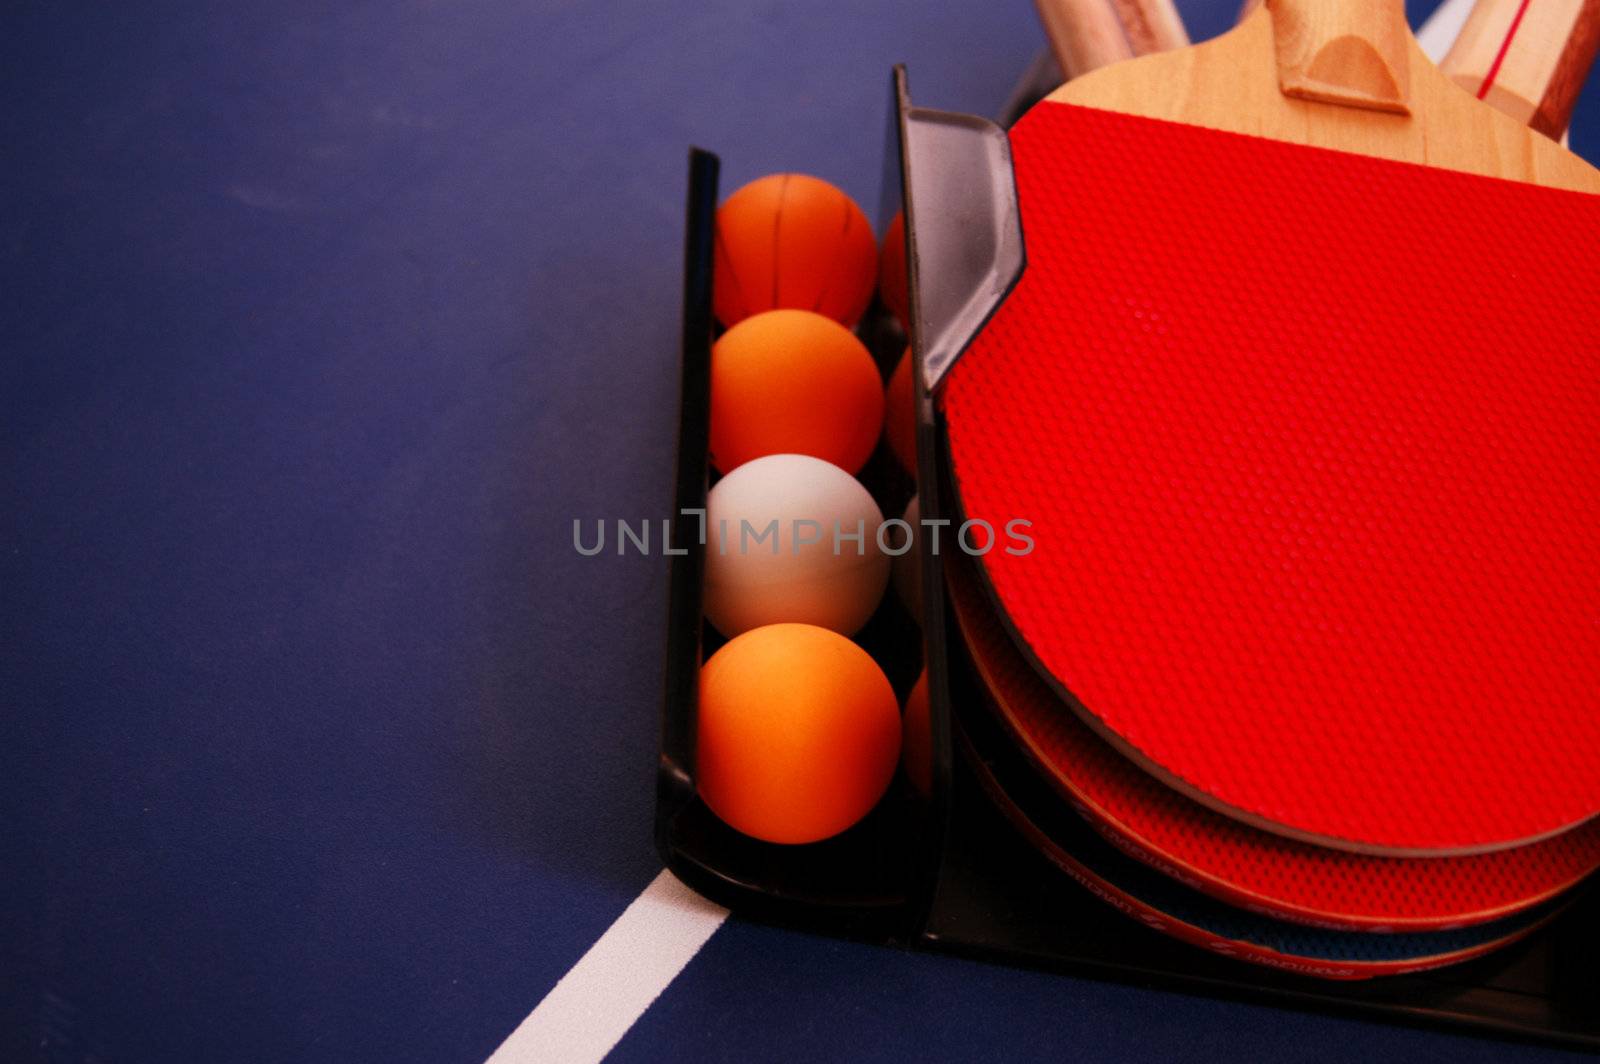 Table tennis by northwoodsphoto